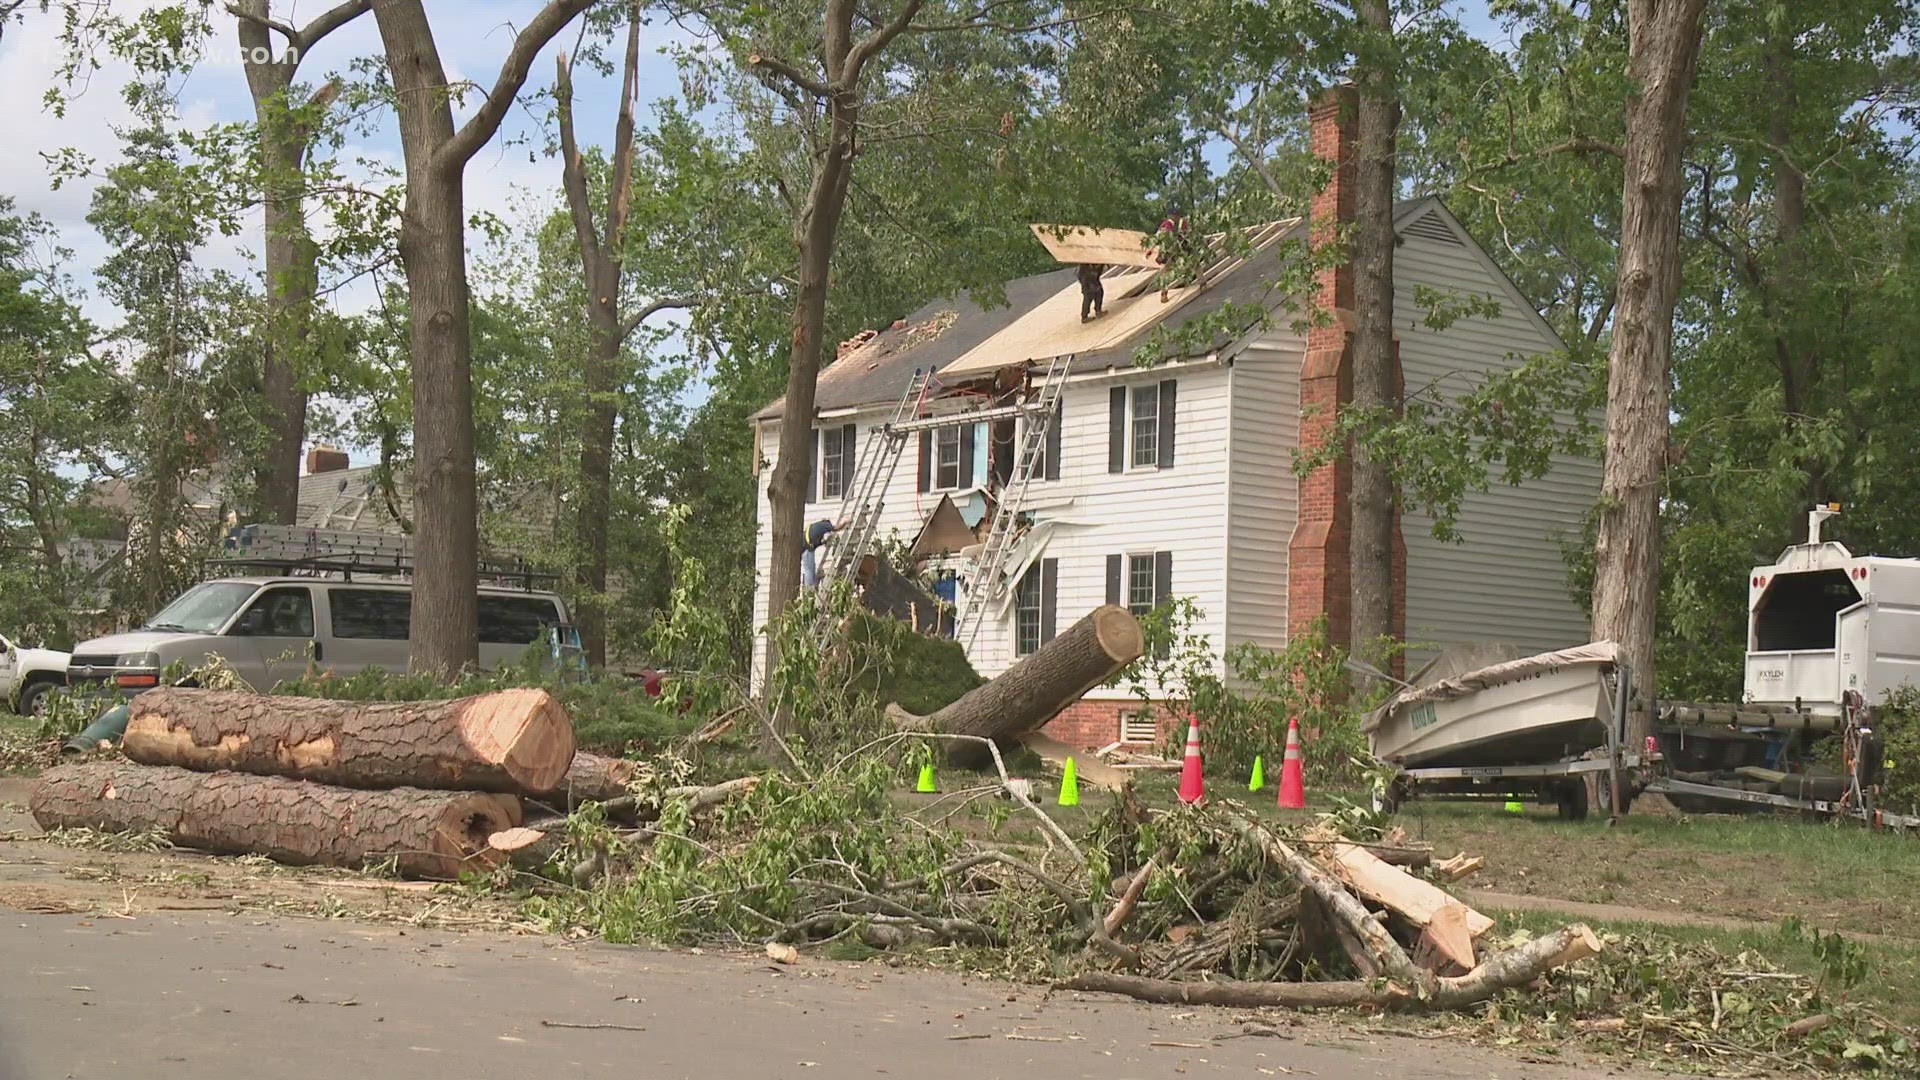 The organization aids in disaster response globally, but after a large tornado ripped through Virginia Beach, the local organization helped here at home.